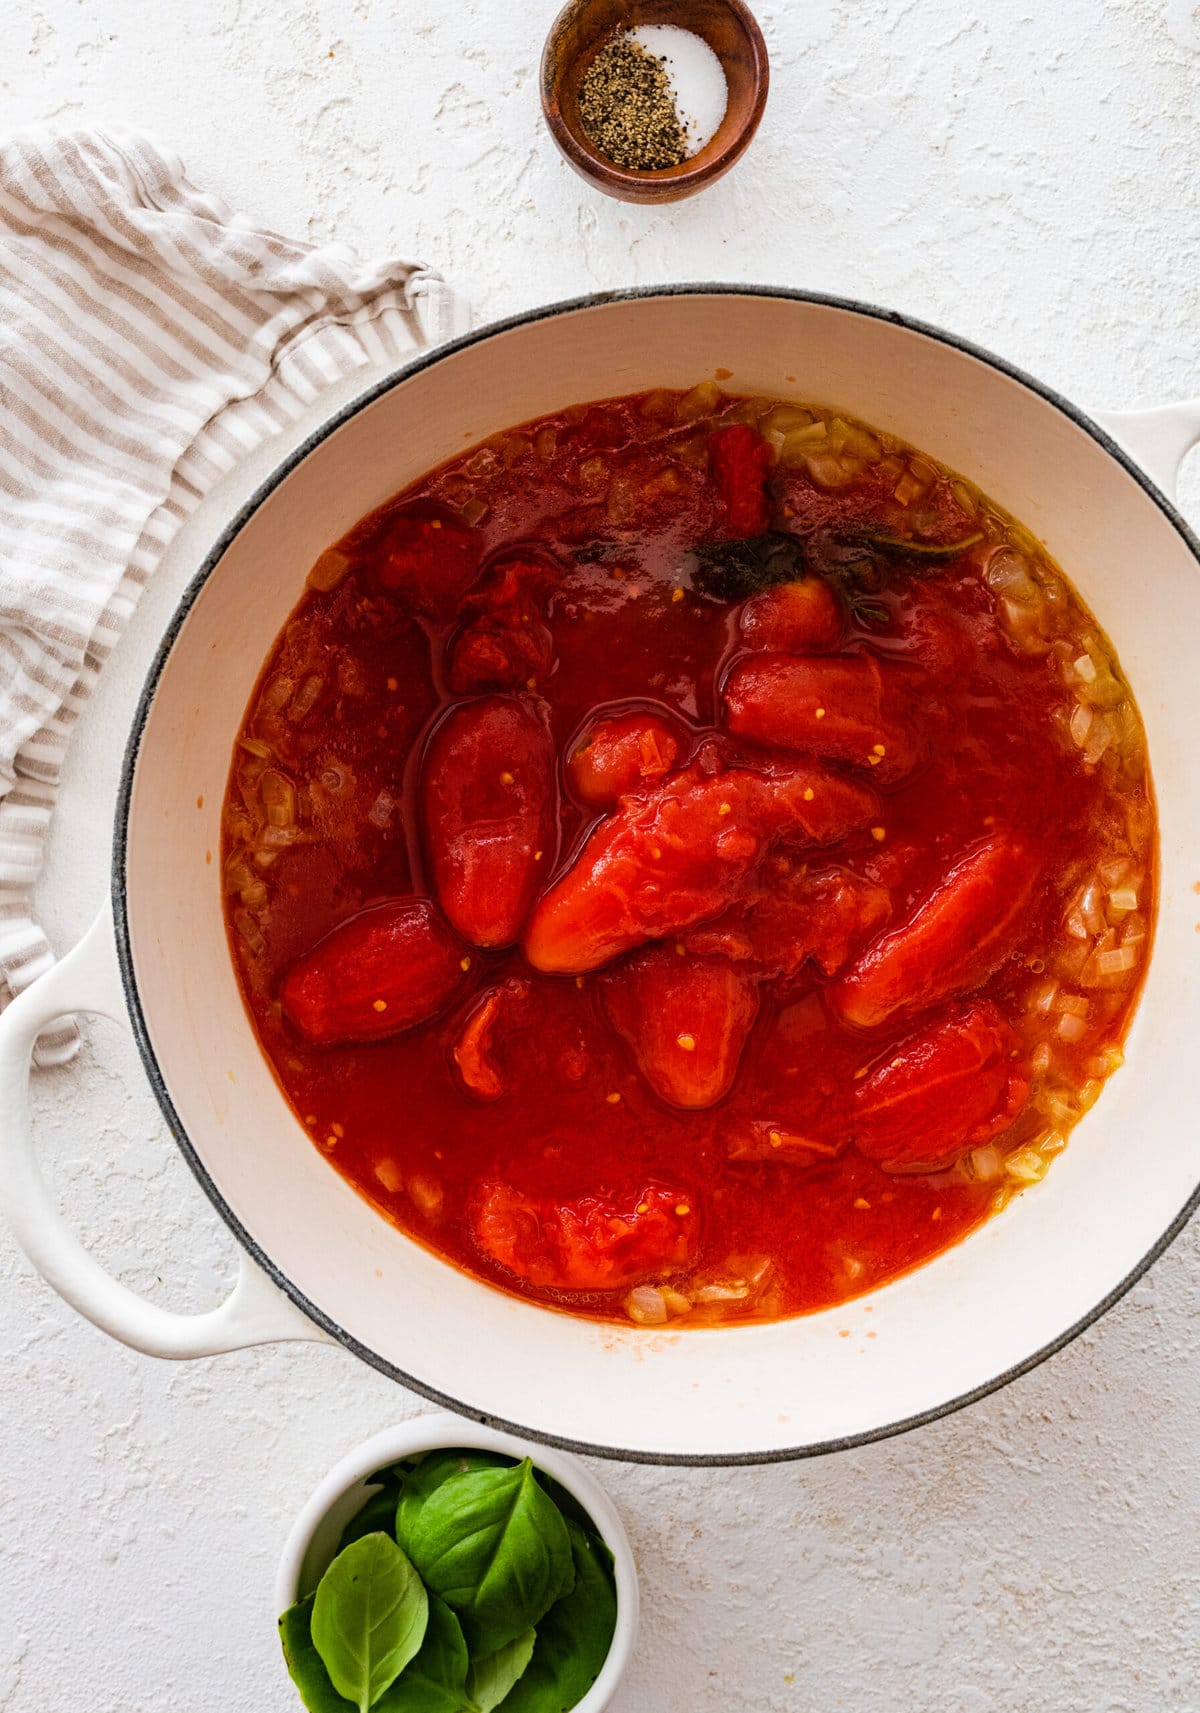 how to make sugo al pomodoro step-by-step photos: adding whole canned tomatoes to the pot with onions.